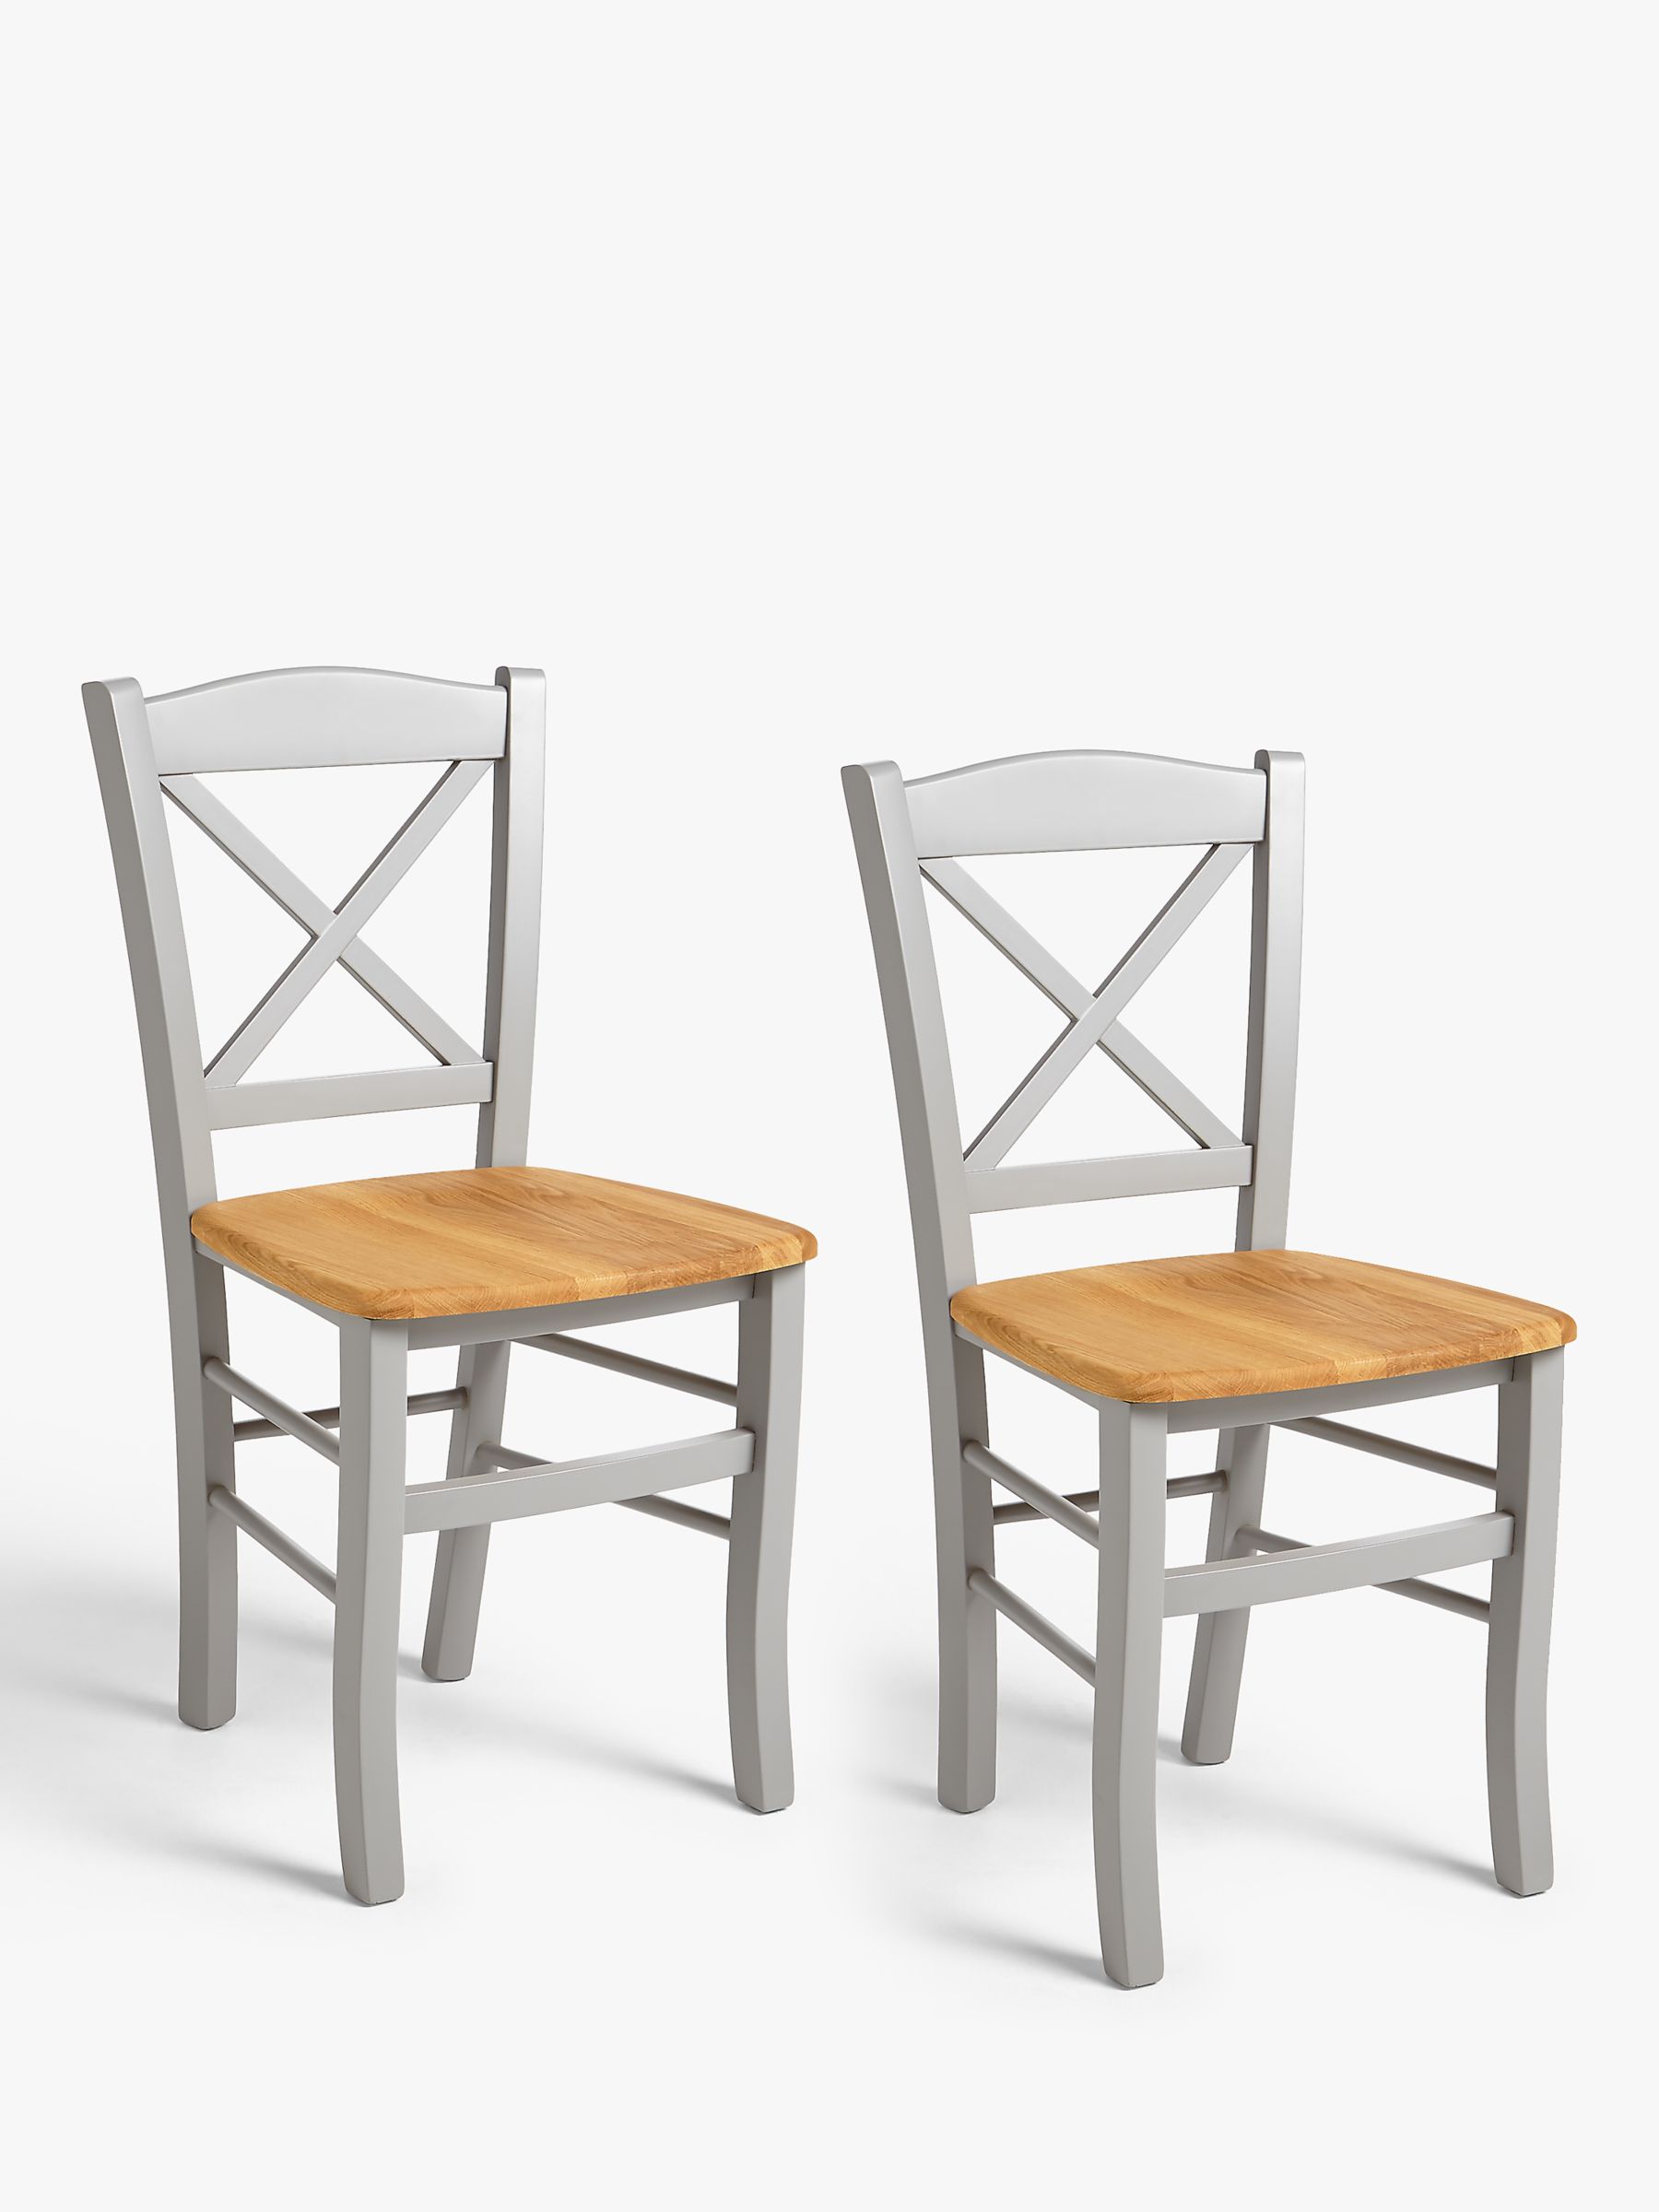 Photo of John lewis anyday clayton beech wood dining chairs set of 2